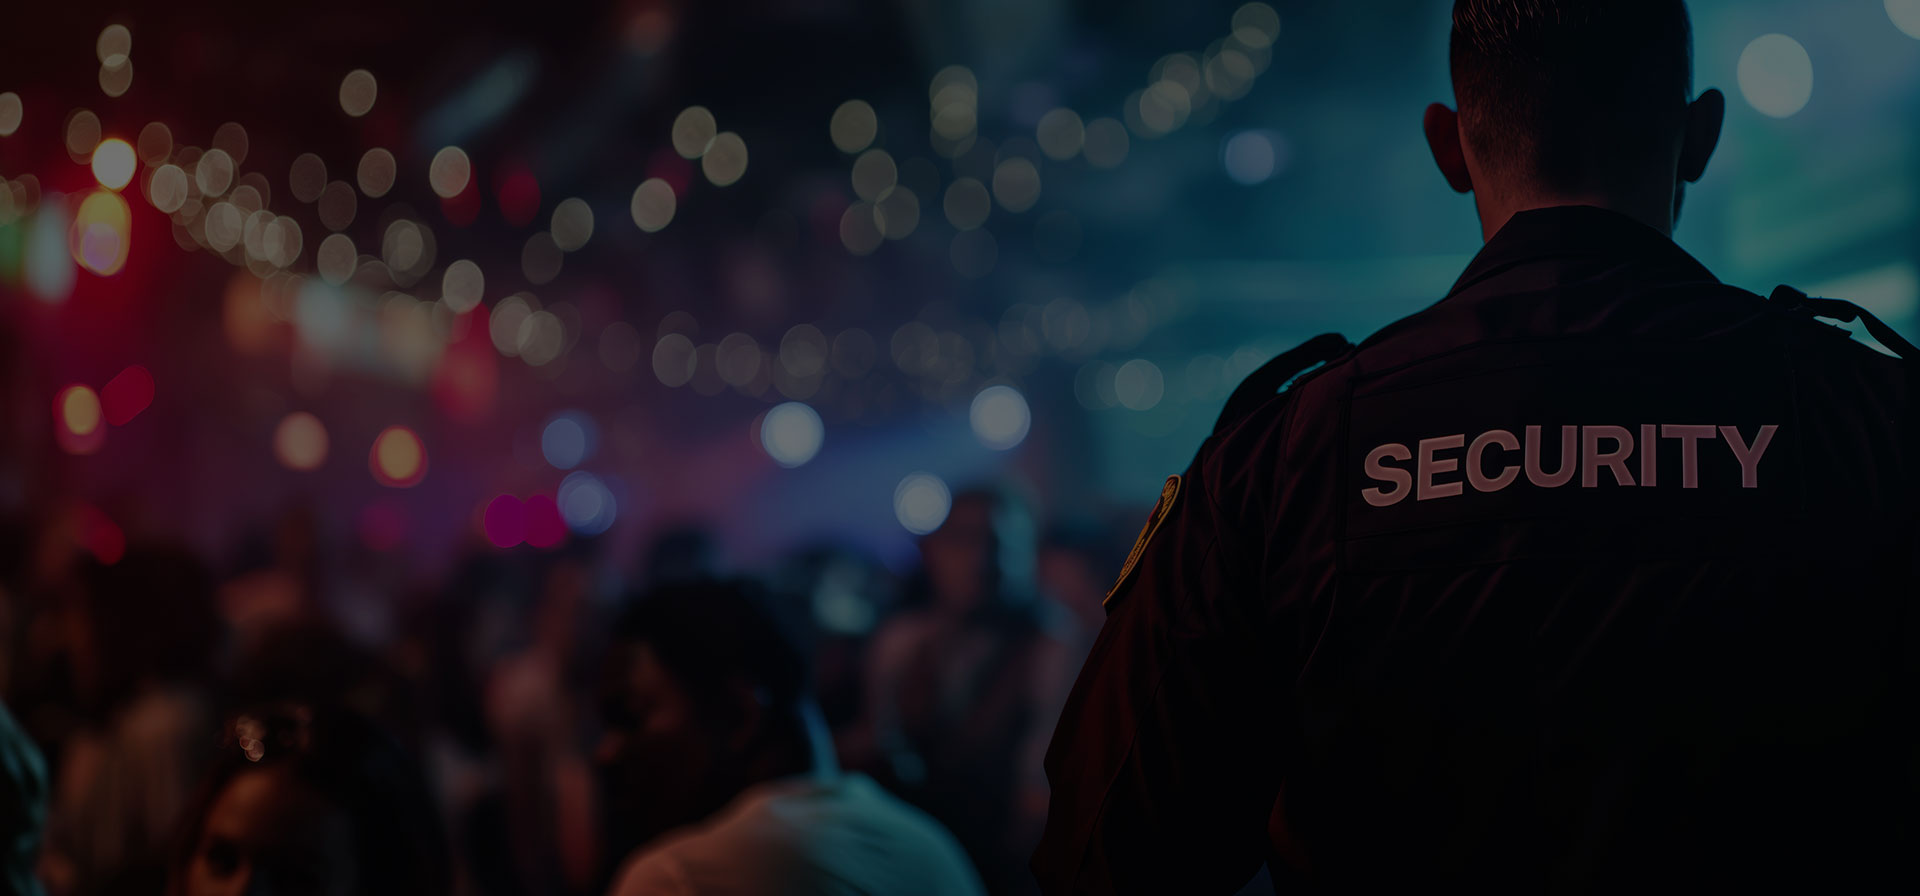 insurance for security guards for nightclubs and bars